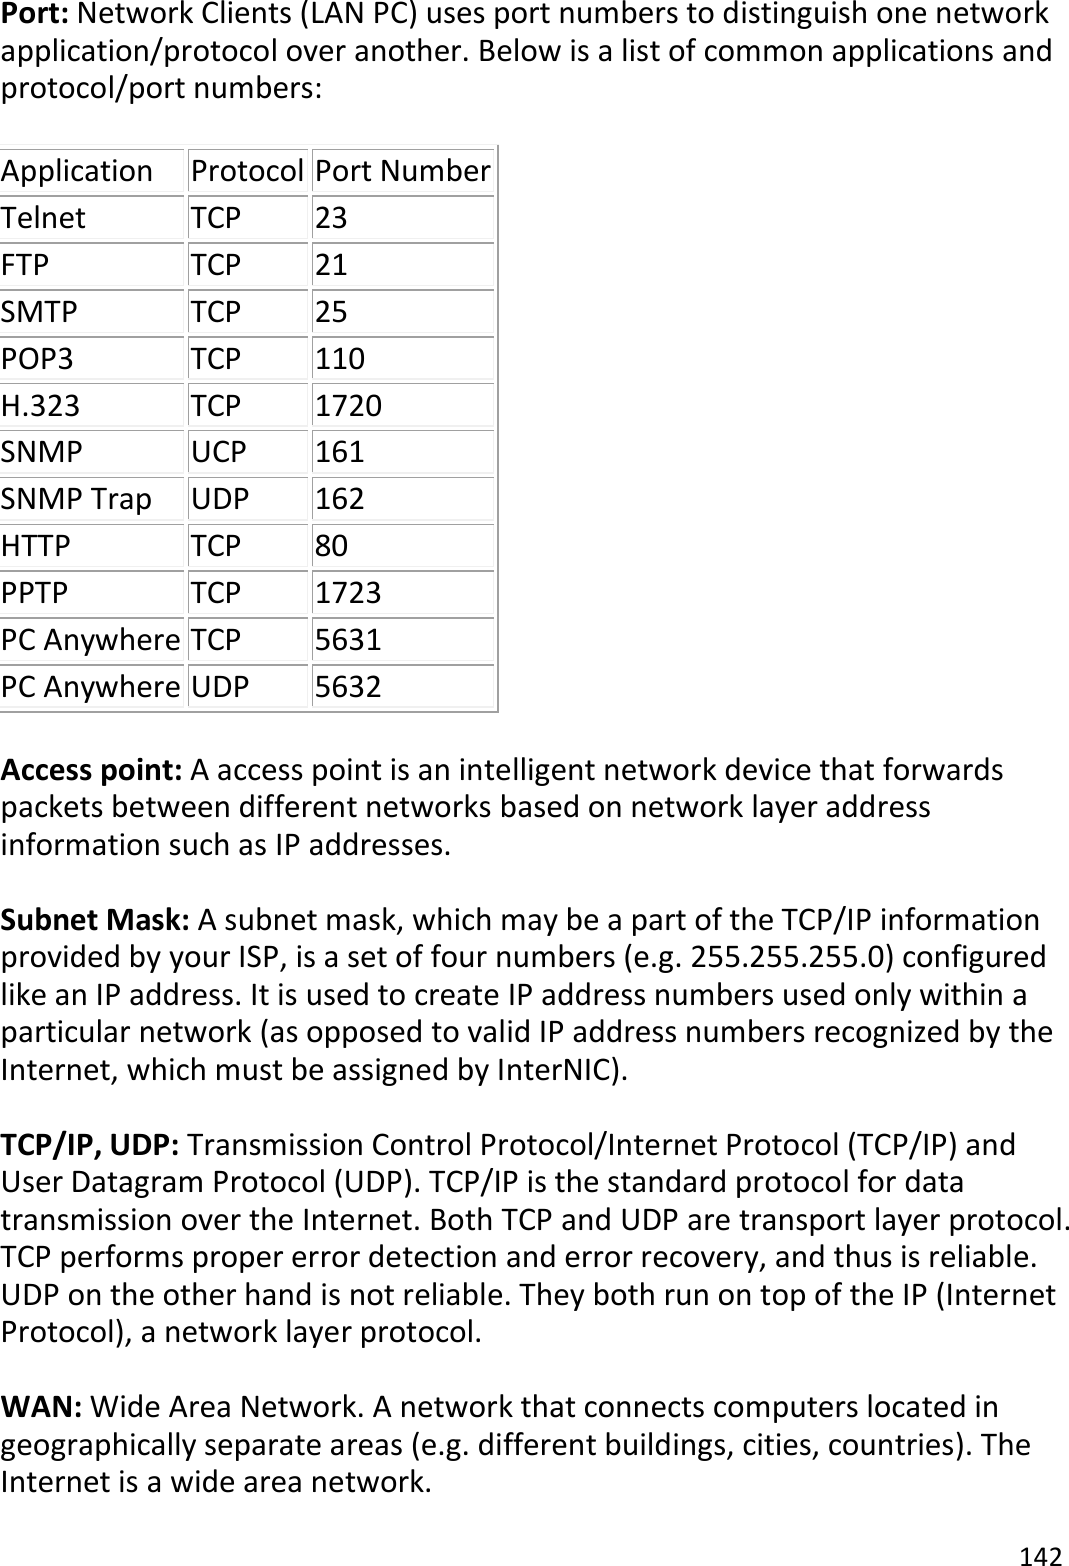 142  Port: Network Clients (LAN PC) uses port numbers to distinguish one network application/protocol over another. Below is a list of common applications and protocol/port numbers:  Application Protocol Port Number Telnet TCP 23 FTP TCP 21 SMTP TCP 25 POP3 TCP 110 H.323 TCP 1720 SNMP UCP 161 SNMP Trap UDP 162 HTTP TCP 80 PPTP TCP 1723 PC Anywhere TCP 5631 PC Anywhere UDP 5632  Access point: A access point is an intelligent network device that forwards packets between different networks based on network layer address information such as IP addresses.  Subnet Mask: A subnet mask, which may be a part of the TCP/IP information provided by your ISP, is a set of four numbers (e.g. 255.255.255.0) configured like an IP address. It is used to create IP address numbers used only within a particular network (as opposed to valid IP address numbers recognized by the Internet, which must be assigned by InterNIC).    TCP/IP, UDP: Transmission Control Protocol/Internet Protocol (TCP/IP) and User Datagram Protocol (UDP). TCP/IP is the standard protocol for data transmission over the Internet. Both TCP and UDP are transport layer protocol. TCP performs proper error detection and error recovery, and thus is reliable. UDP on the other hand is not reliable. They both run on top of the IP (Internet Protocol), a network layer protocol.  WAN: Wide Area Network. A network that connects computers located in geographically separate areas (e.g. different buildings, cities, countries). The Internet is a wide area network.  